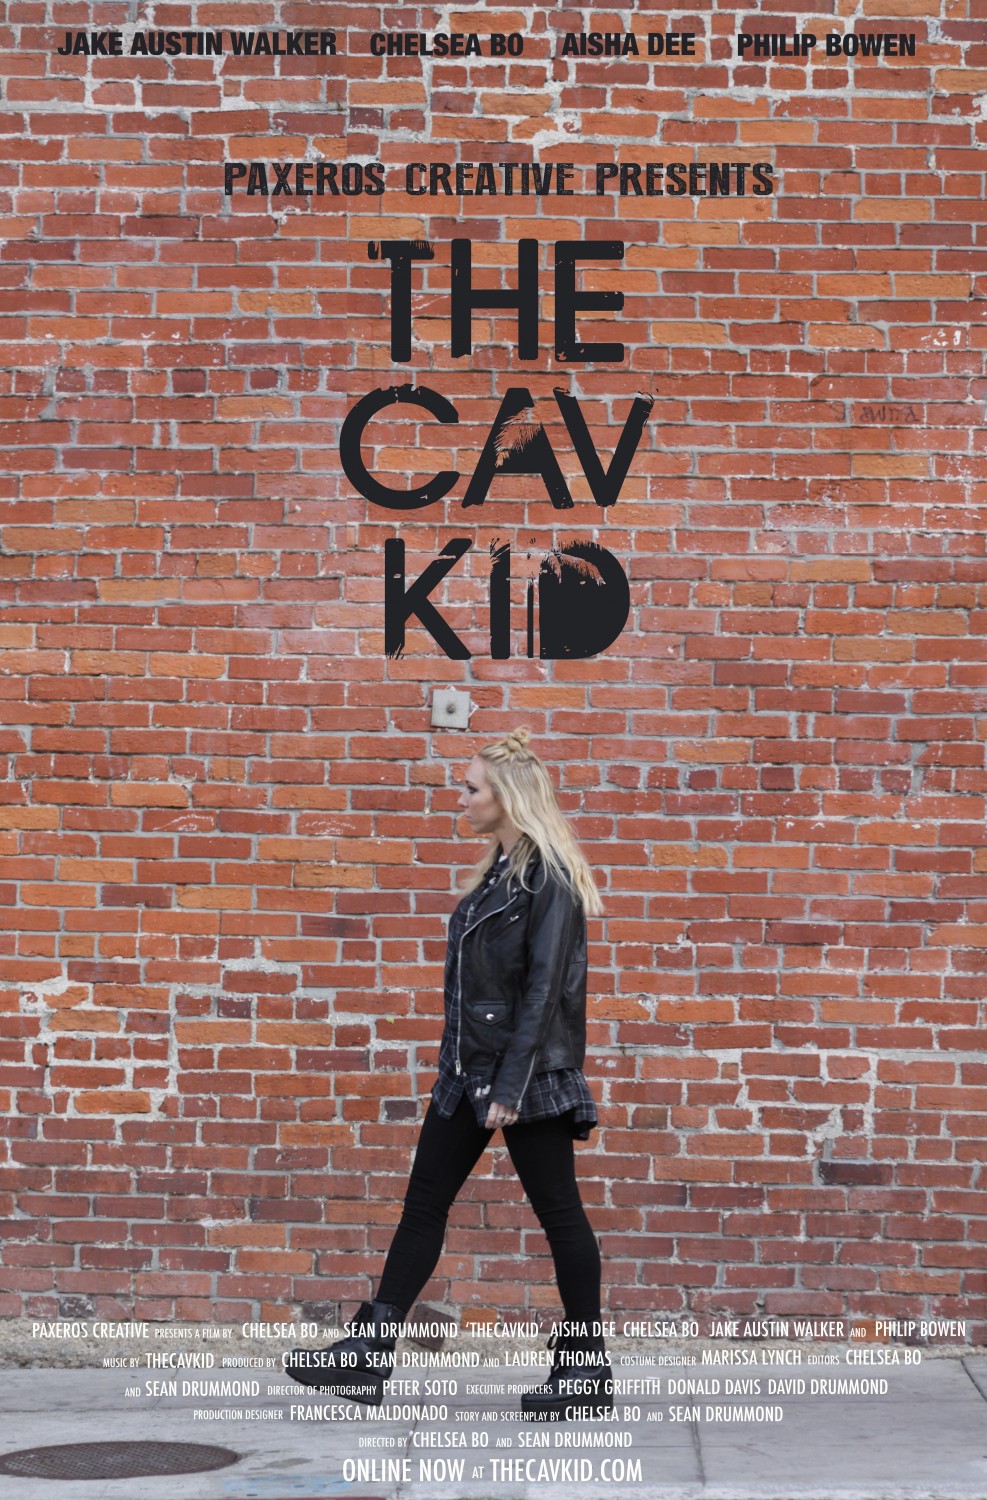 Extra Large Movie Poster Image for TheCavKid